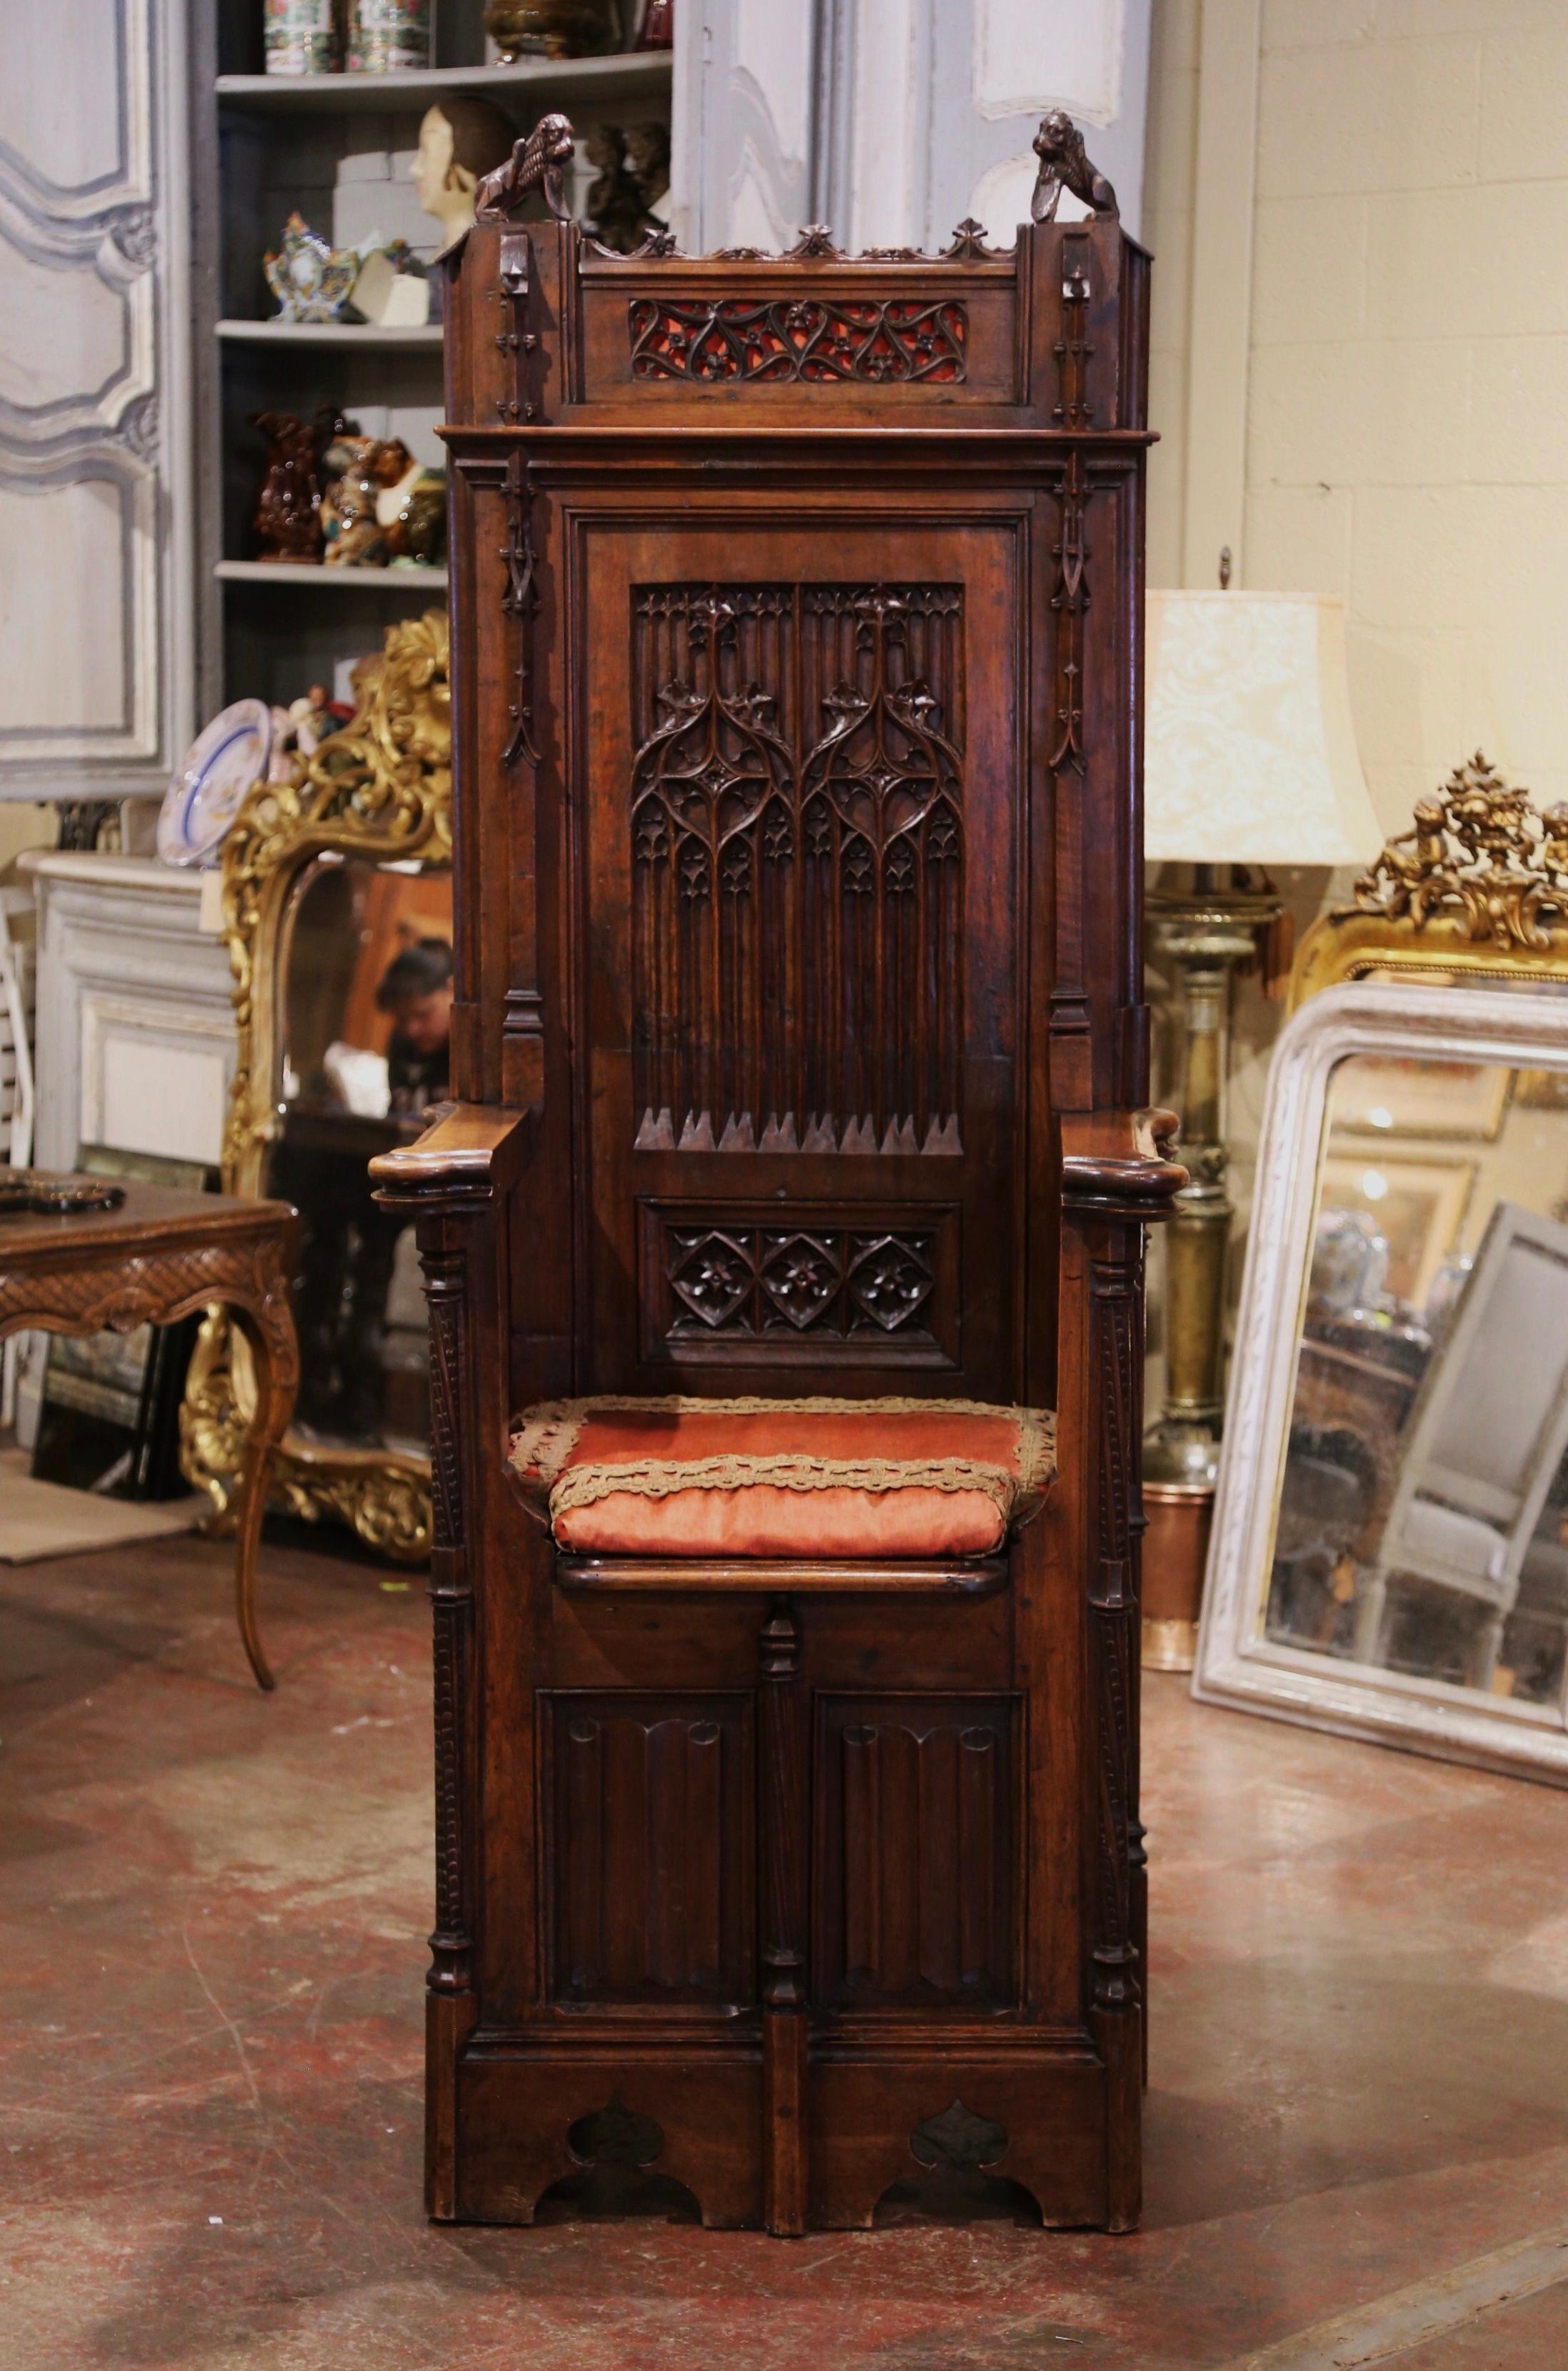 This Gothic “Cathedre” (French for Cathedra or bishop’s throne) was crafted in southern France circa 1860. Built of walnut, the chair stands on bracket feet over a scalloped plinth apron. The tall back is hand carved with pointed arch and tracery